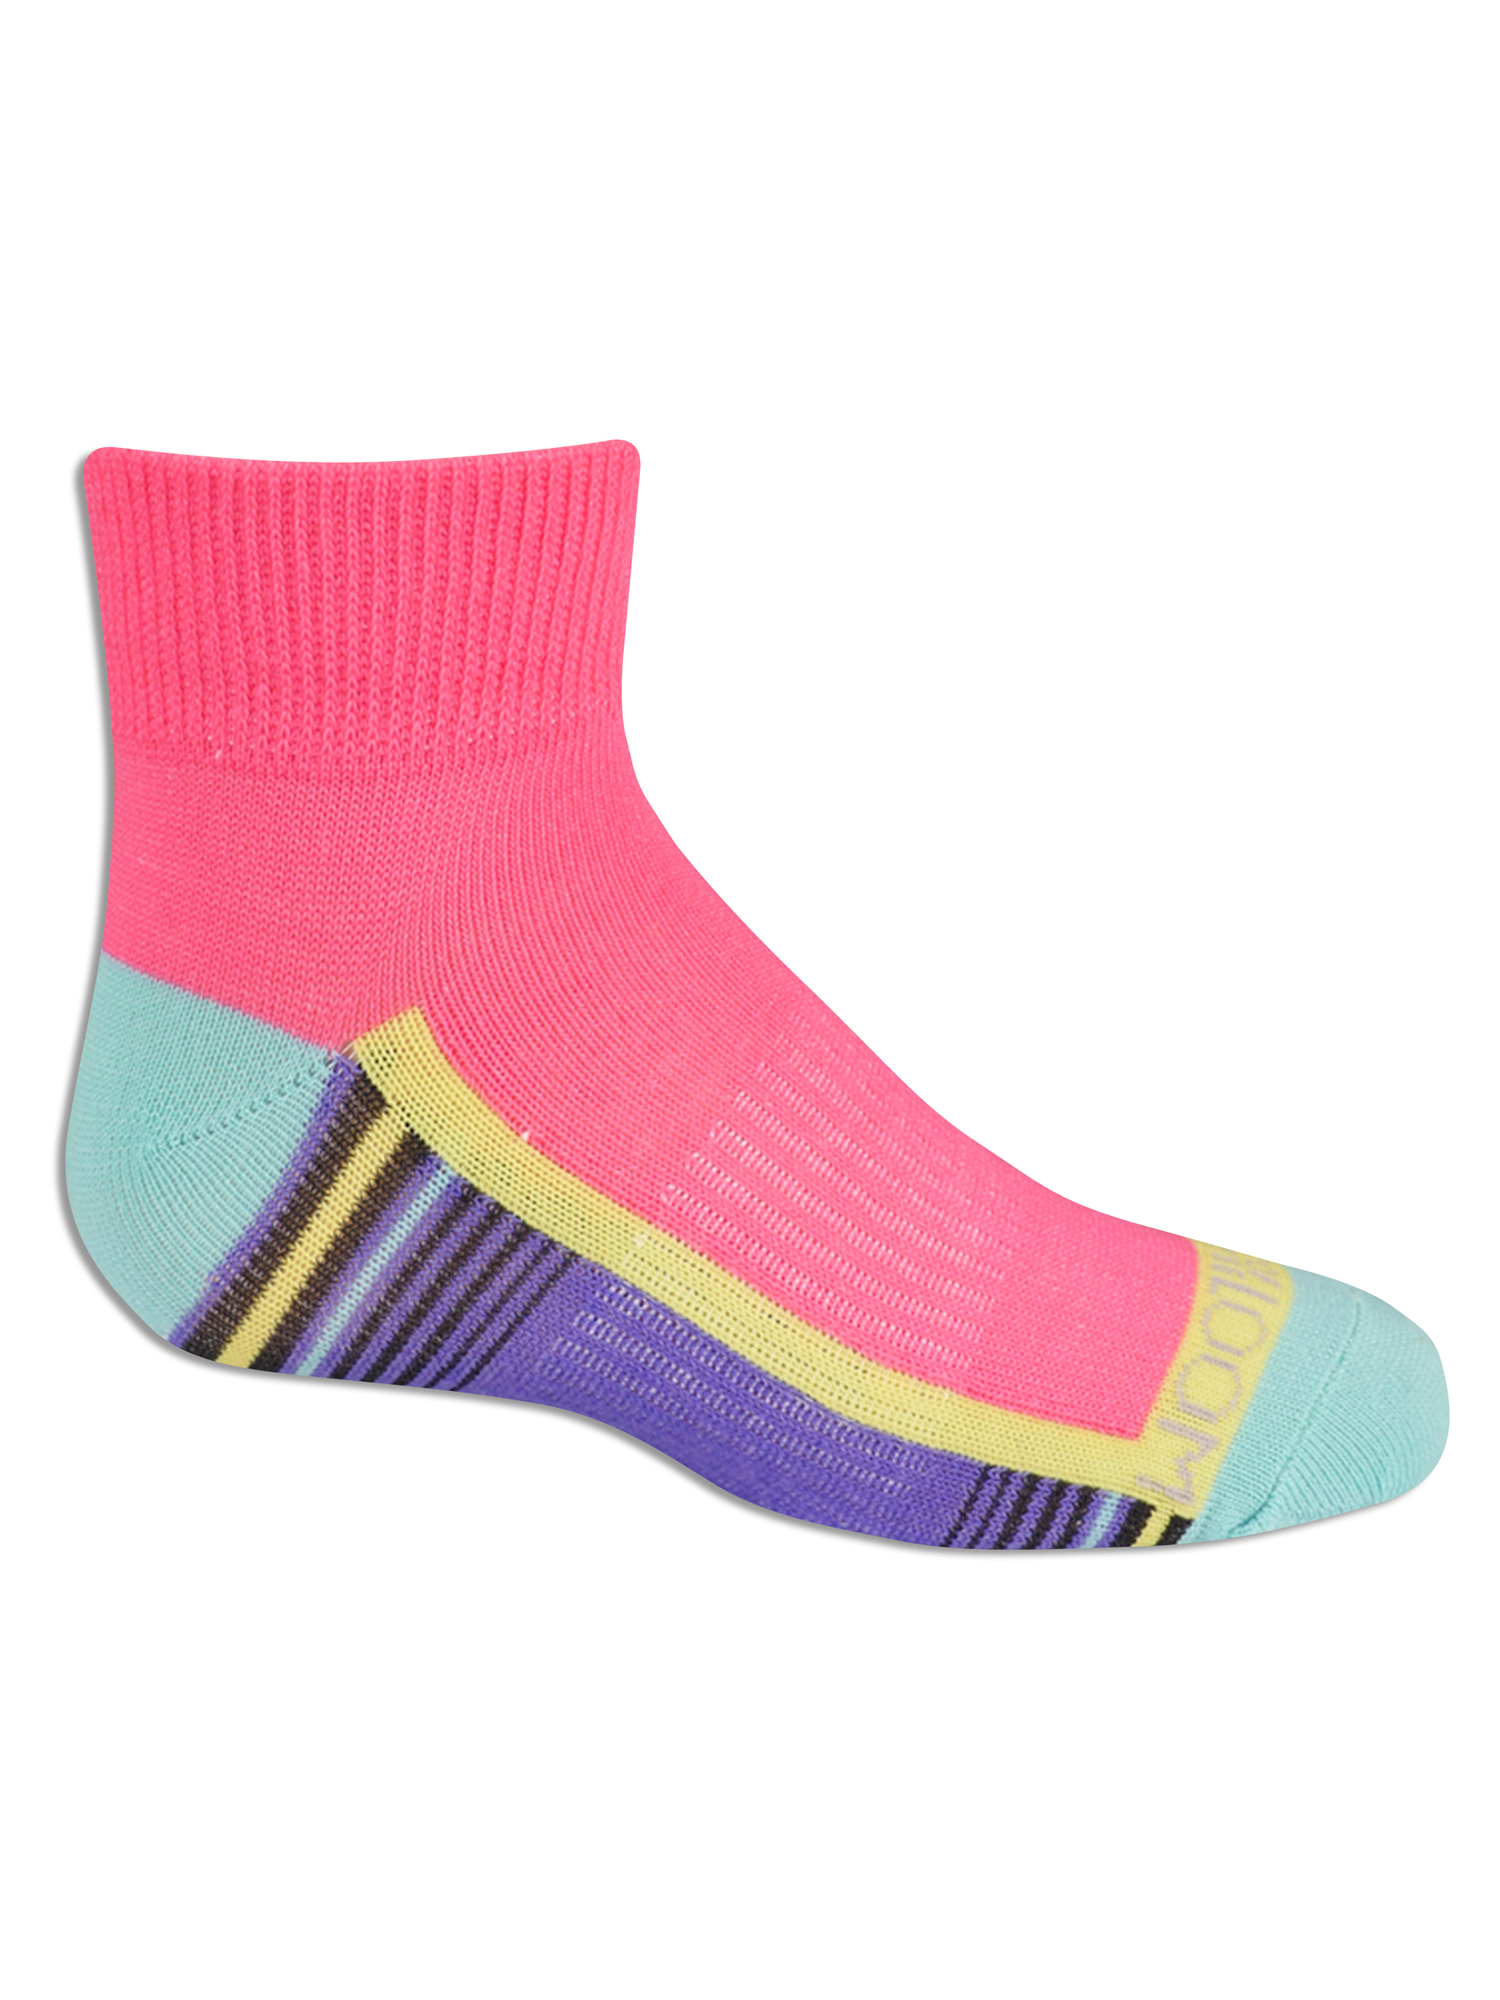 Fruit of the Loom Girls Ankle Socks 6-Pack, Sizes S-L - image 2 of 4